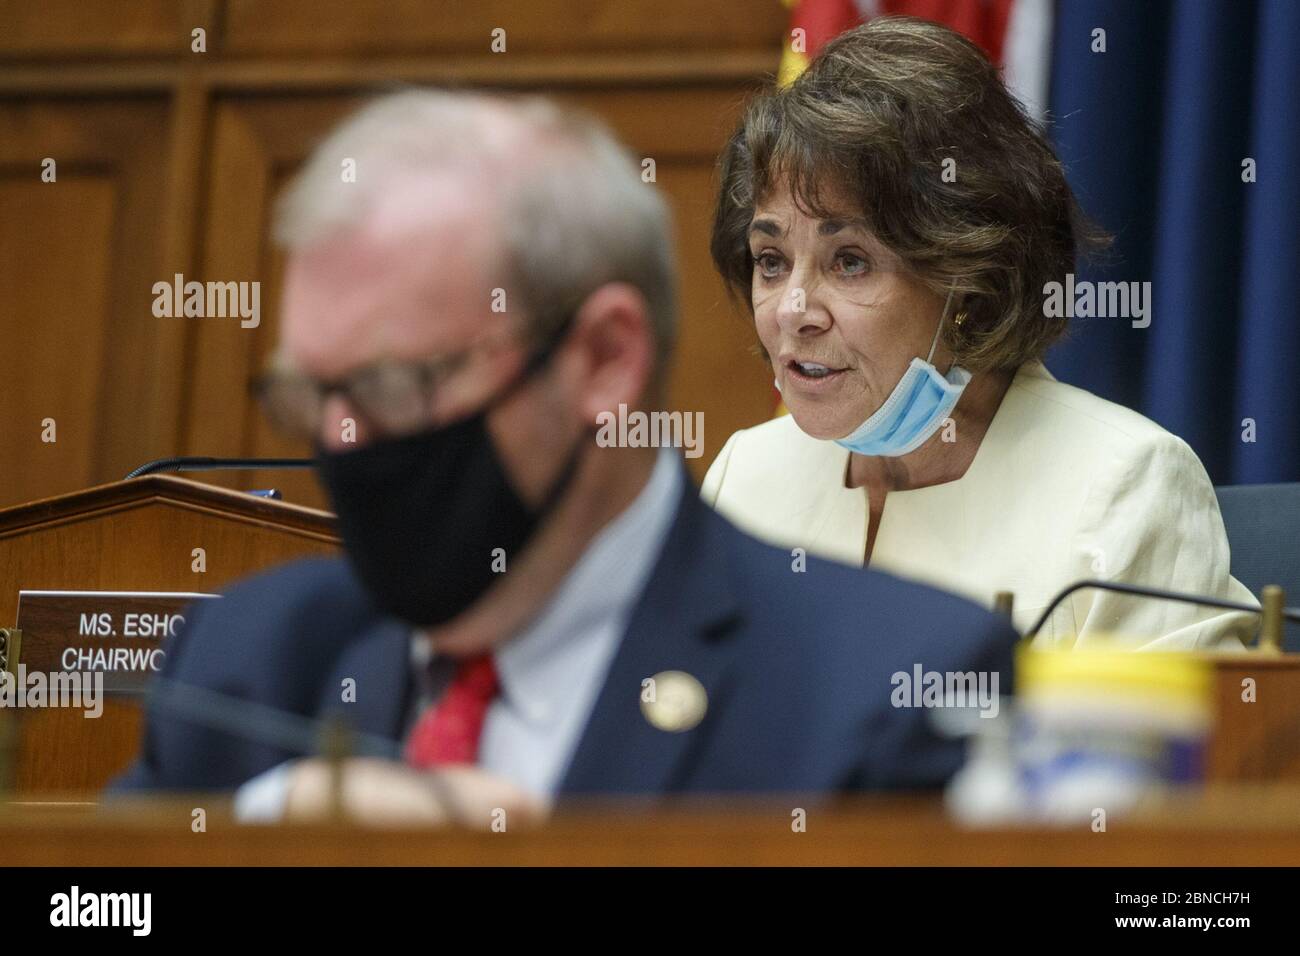 Washington, United States. 14th May, 2020. Committee Chairwoman Anna Eshoo delivers opening remarks during the House Energy and Commerce Subcommittee on Health hearing to discuss protecting scientific integrity in response to the coronavirus outbreak on Capitol Hill in Washington, DC on Thursday, May 14, 2020. Pool Photo by Shawn Thew/UPI Credit: UPI/Alamy Live News Stock Photo